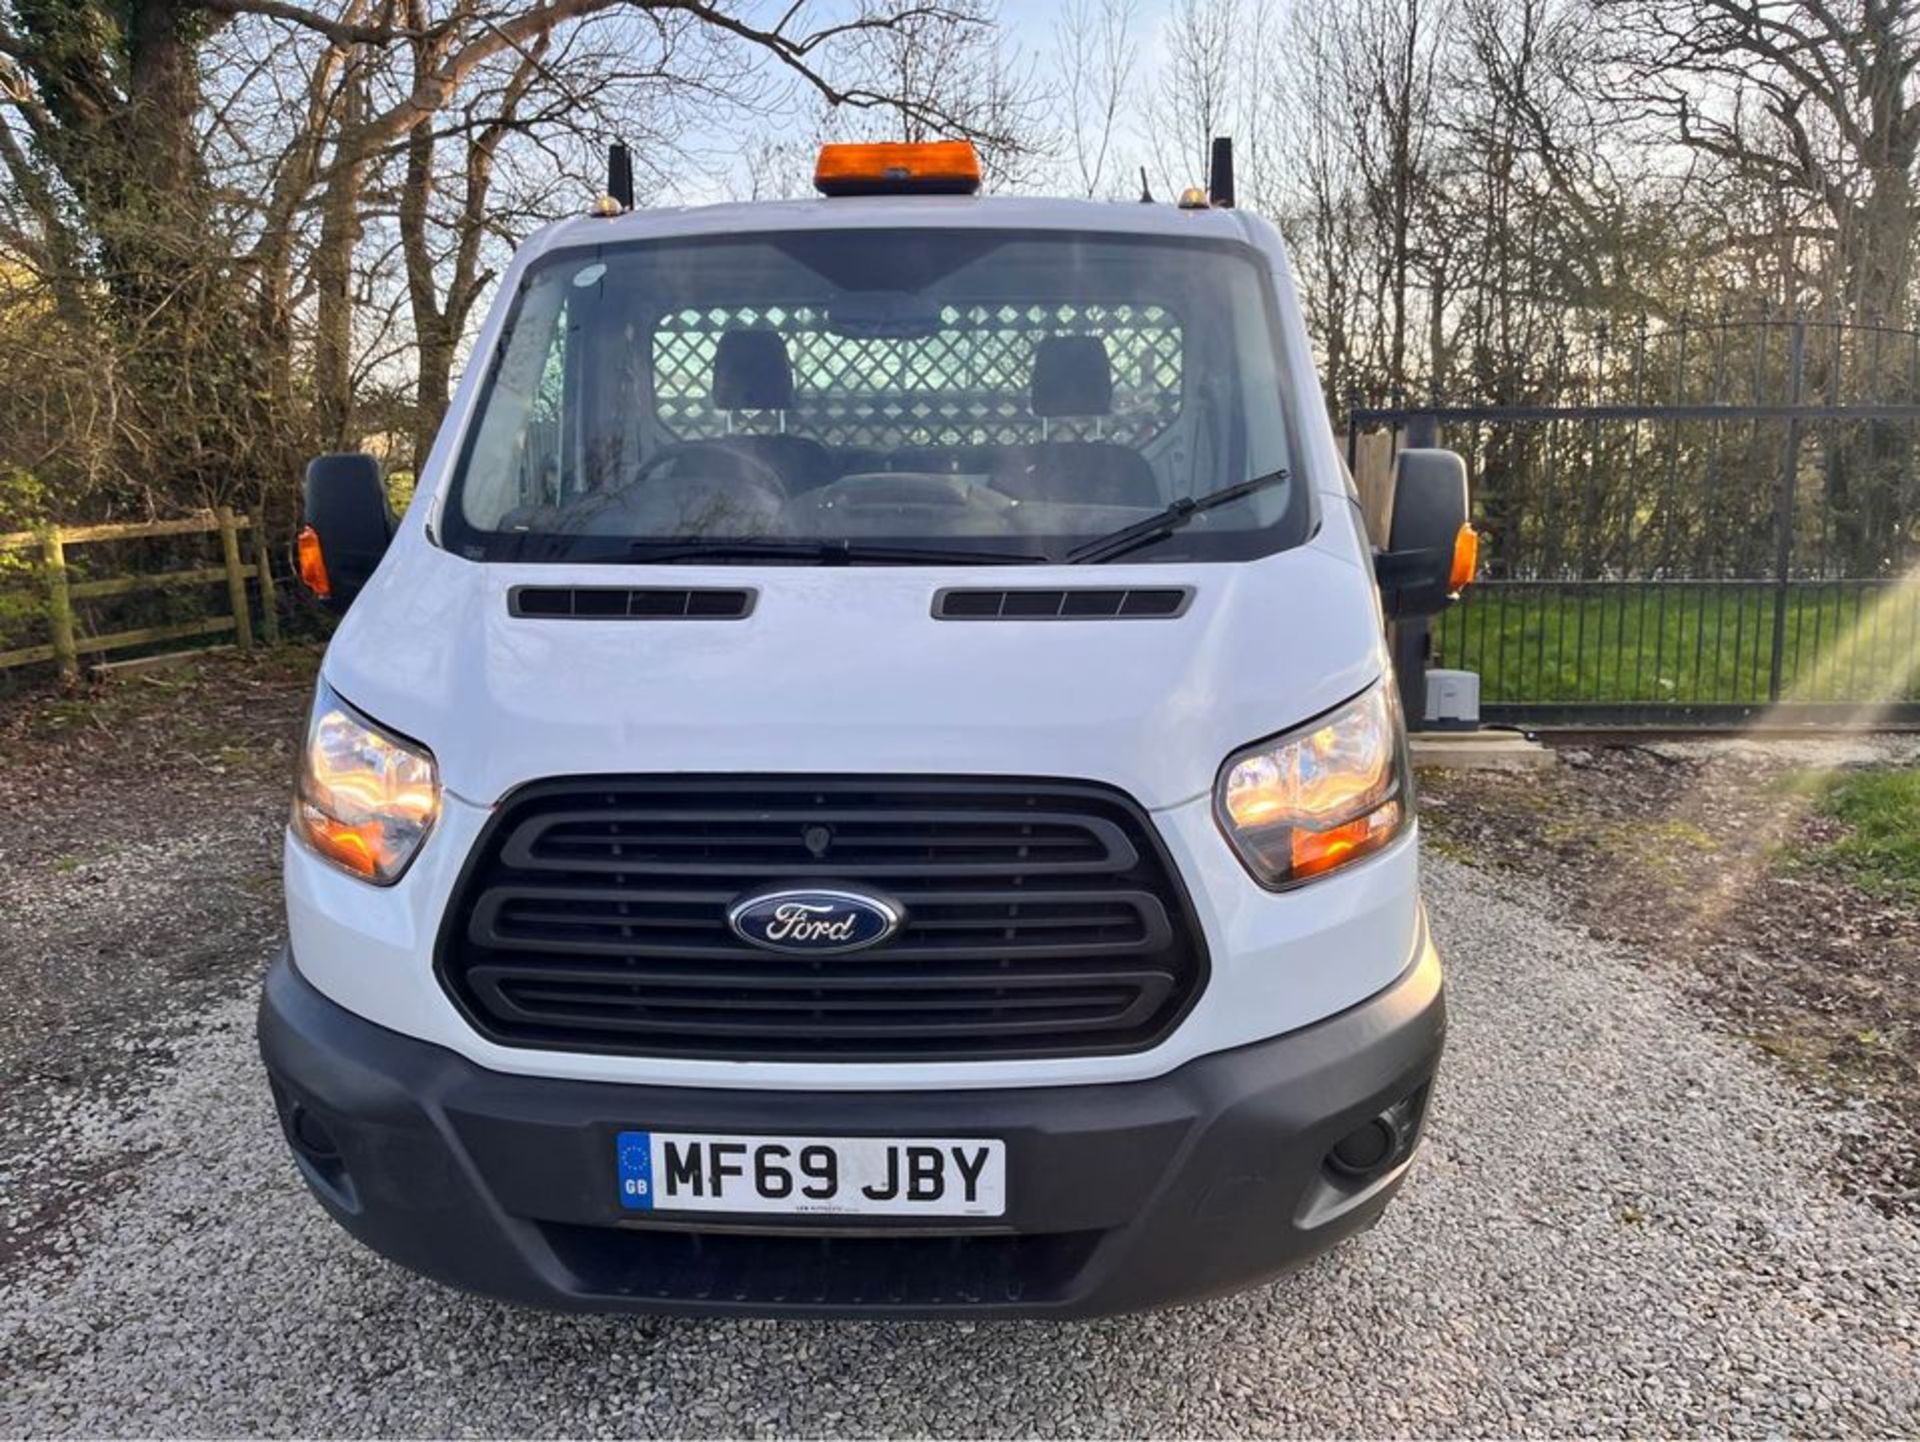 2020 Ford Transit Dropside Truck (LWB) - Image 4 of 11